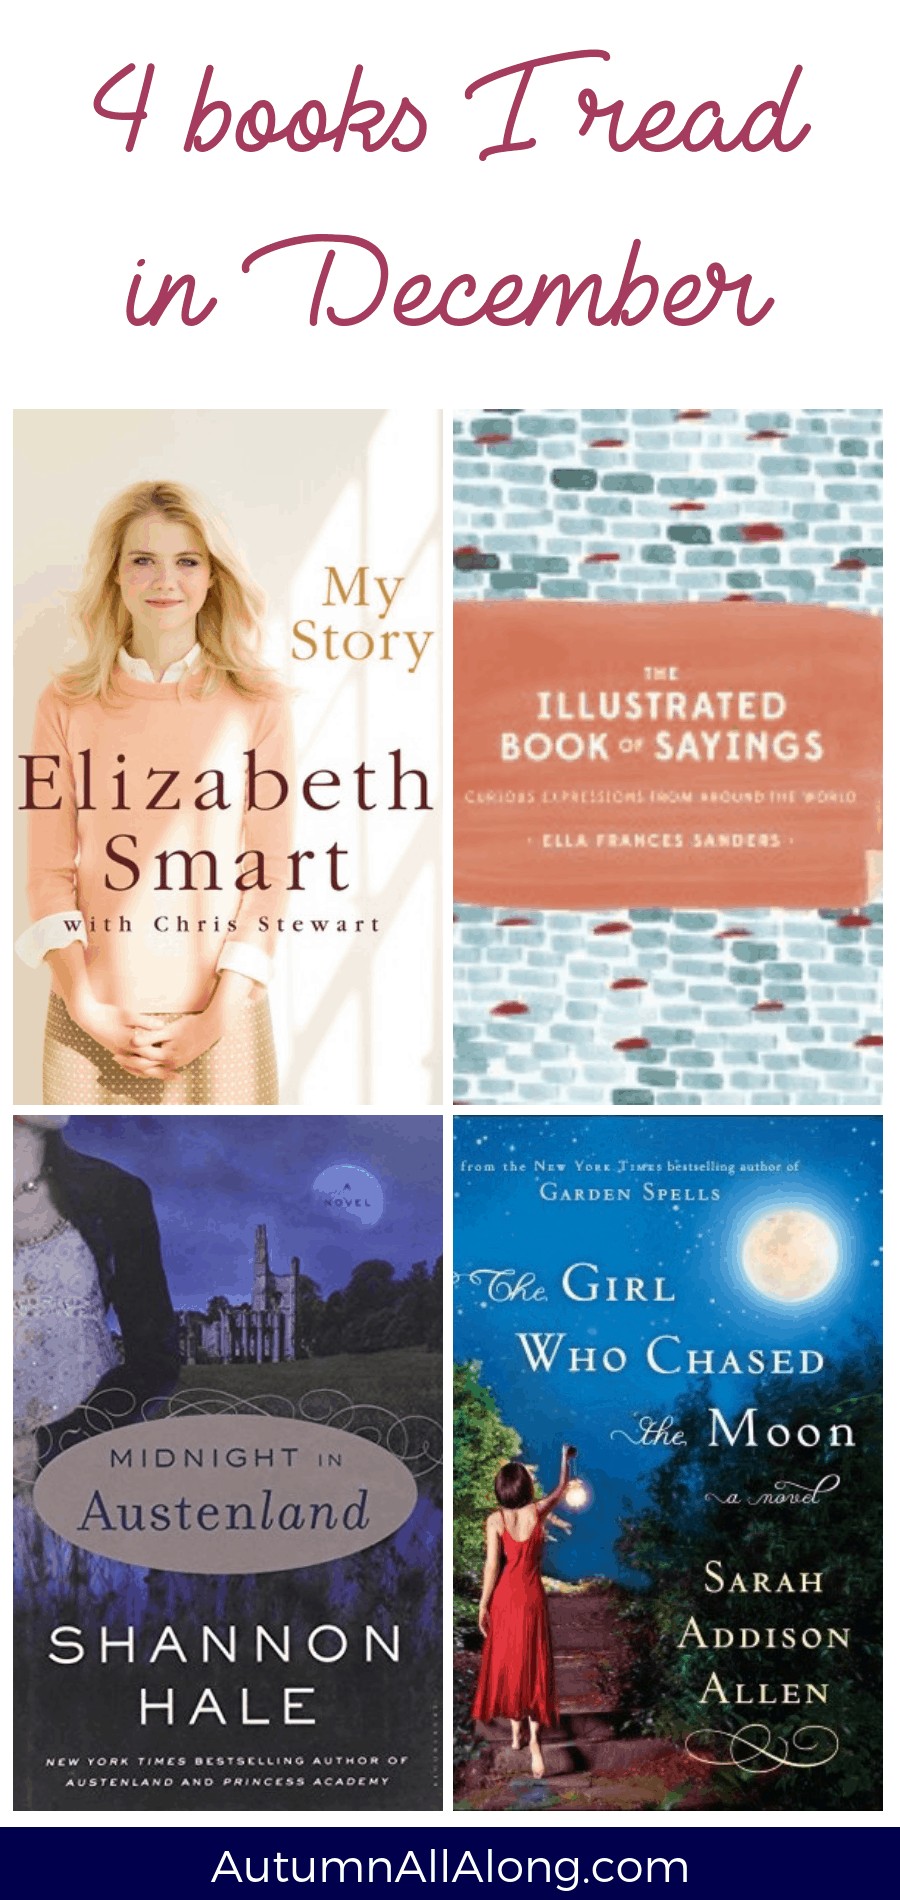 December bookshelf updates// what did I read this month? Reviews on: The Girl Who Chased the Moon, My Story by Elizabeth Smart, The Illustrated Book of Sayings, and Midnight in Austenland | via Autumn All Along